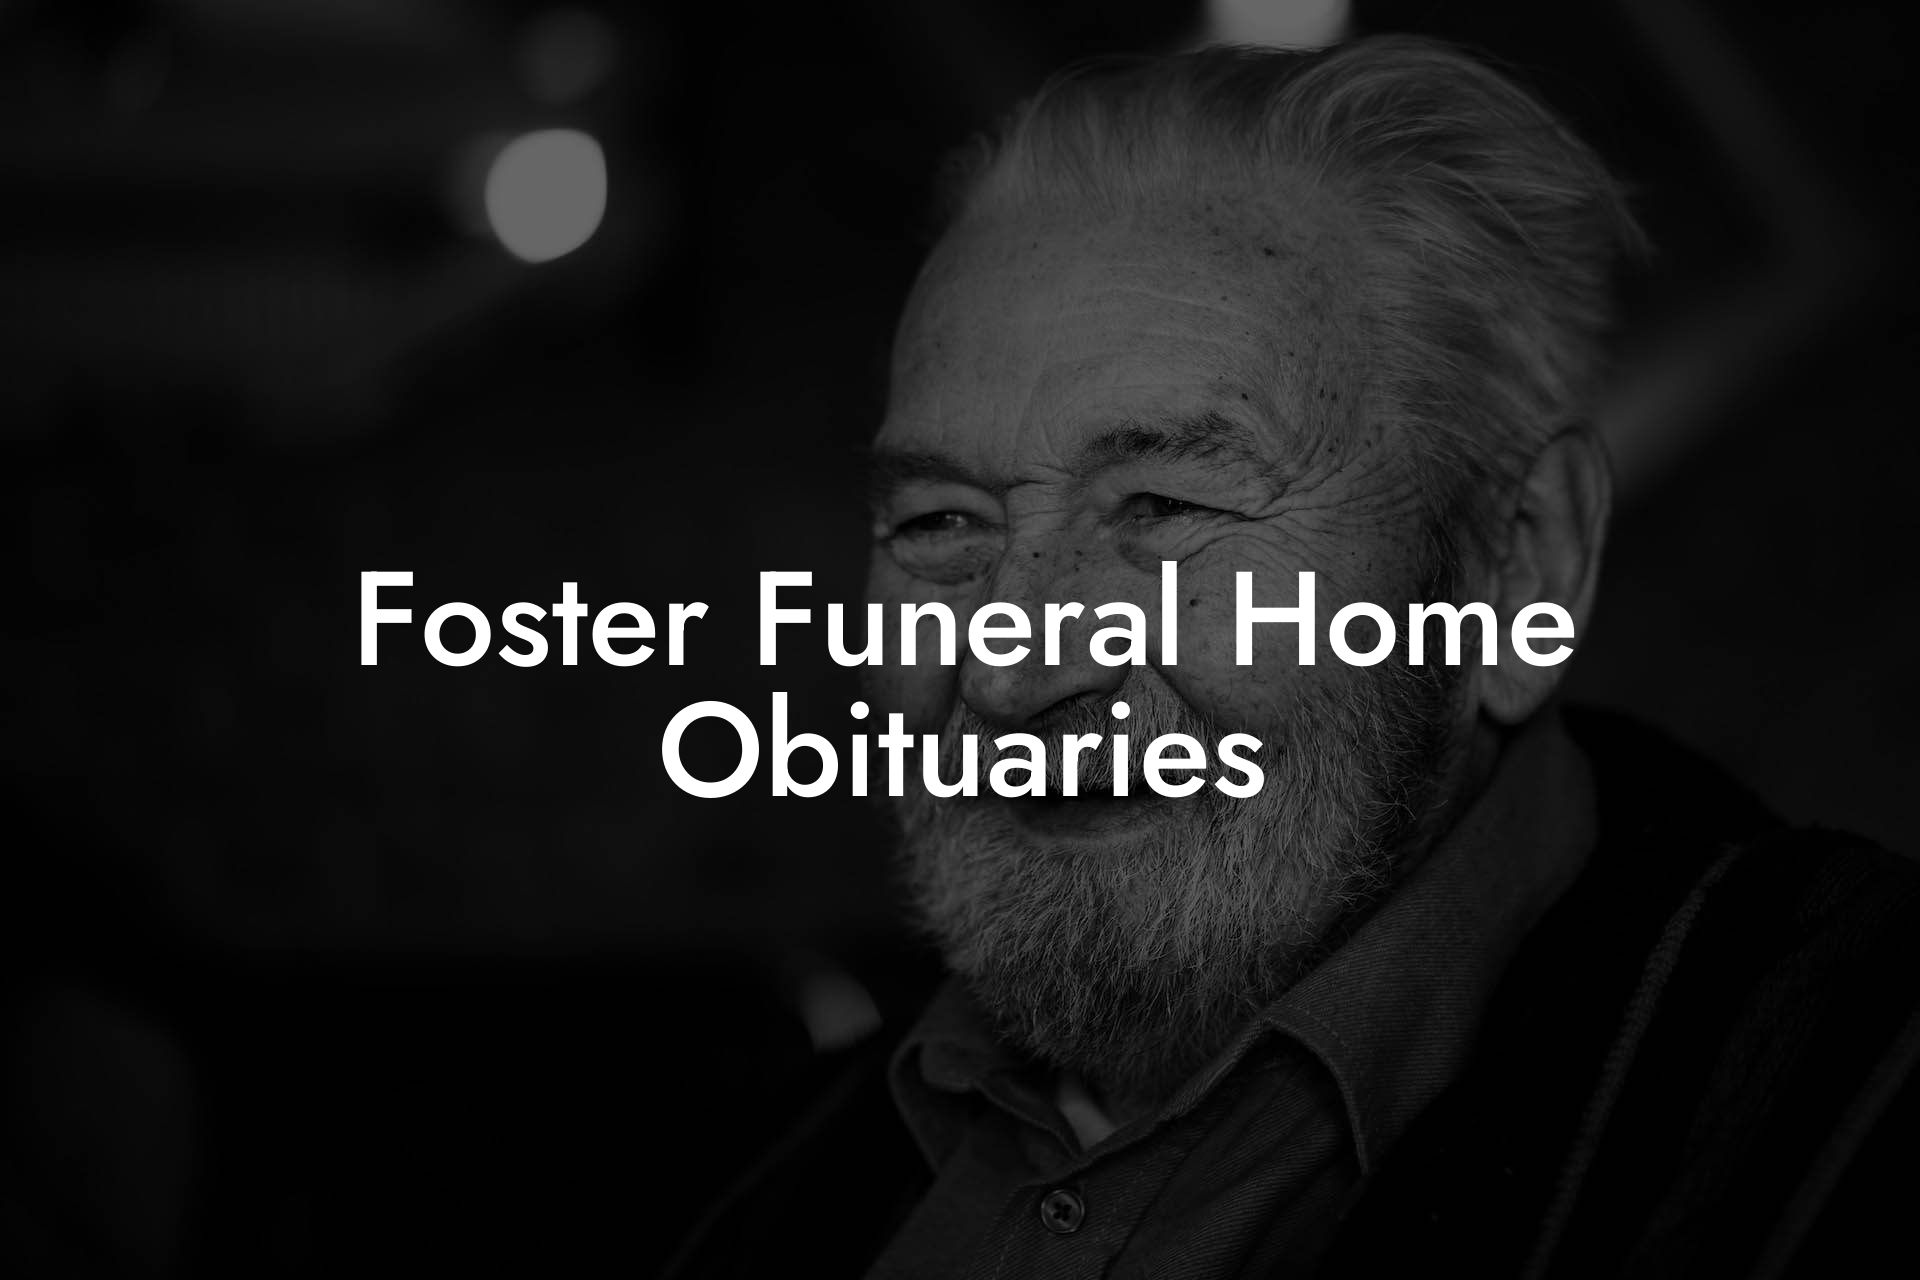 Foster Funeral Home Obituaries